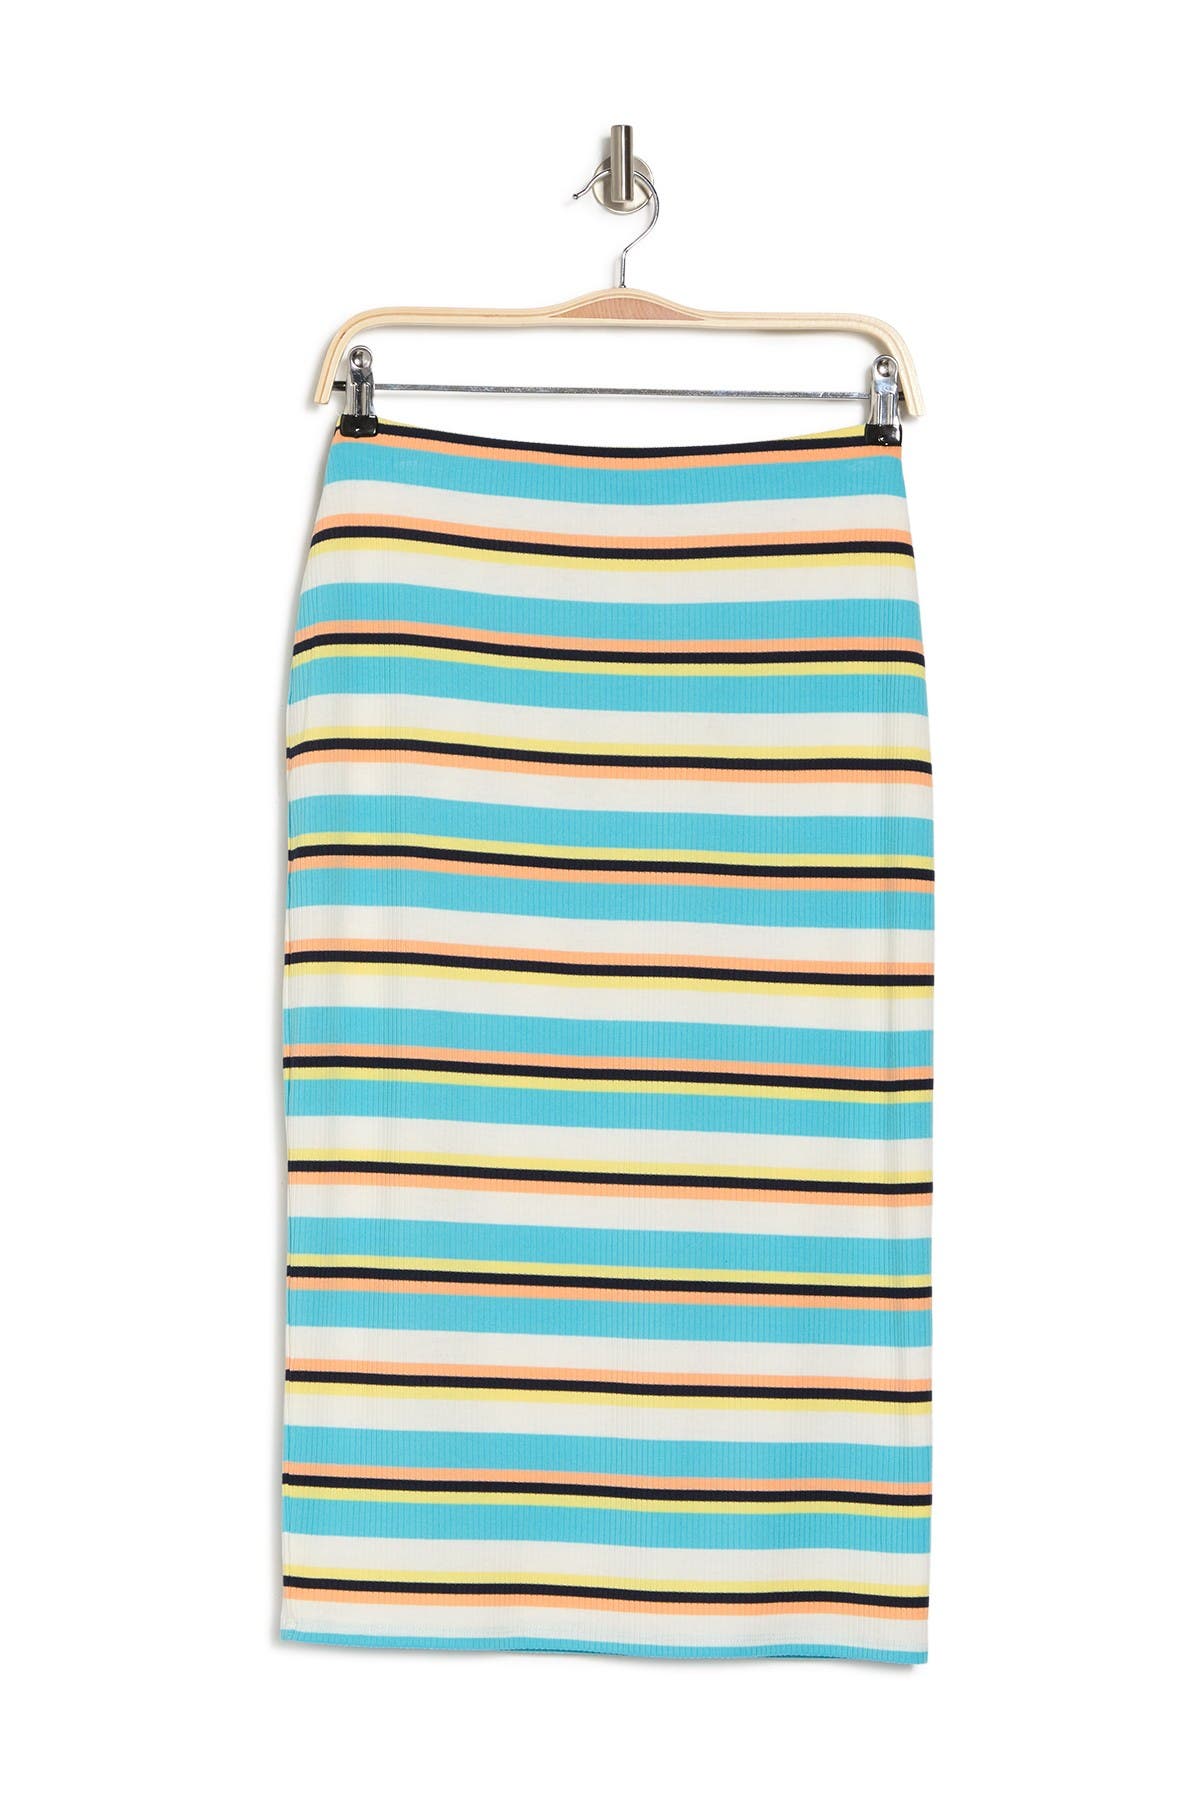 Afrm Port Ribbed Pencil Skirt In Multi Yellow/blue St